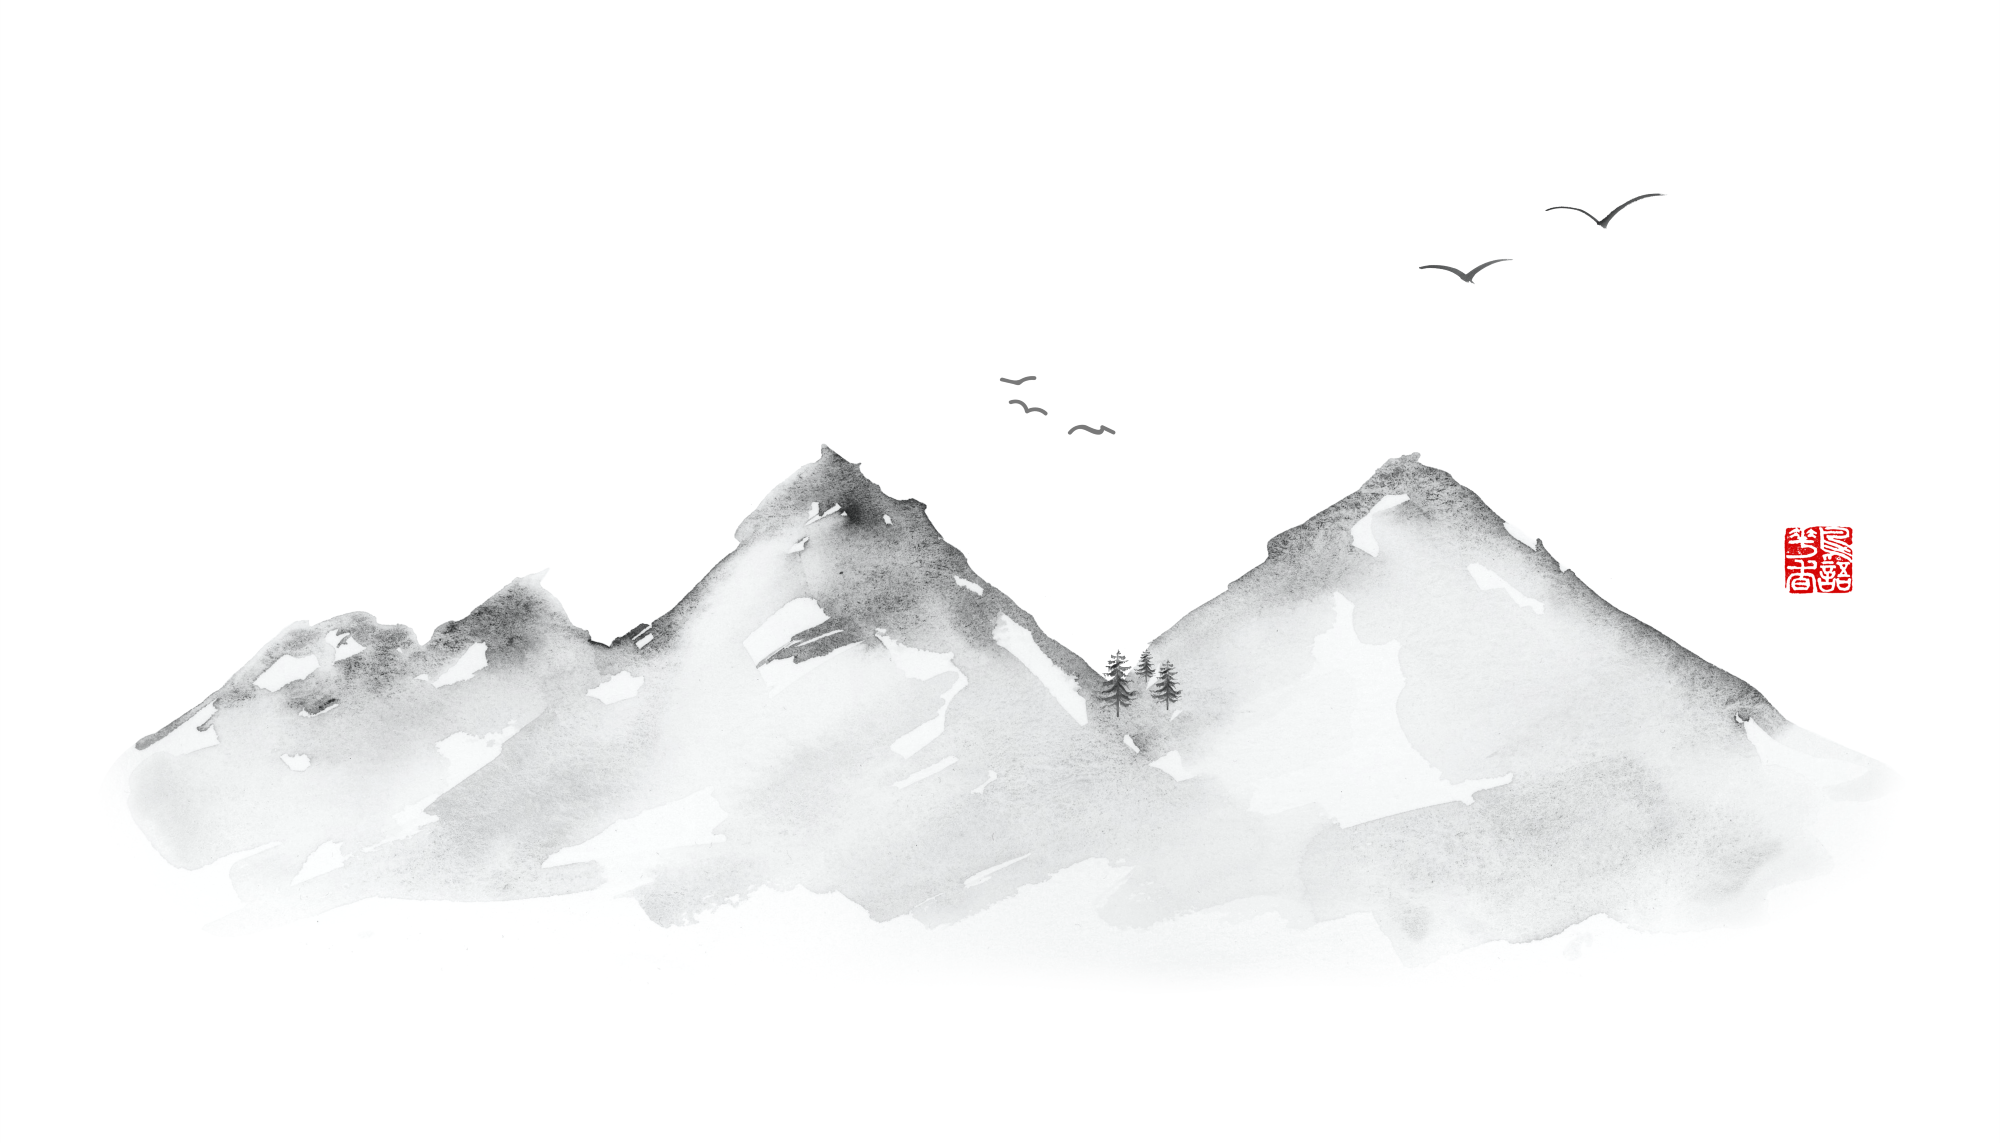 The Silent Wisdom of the Mountains